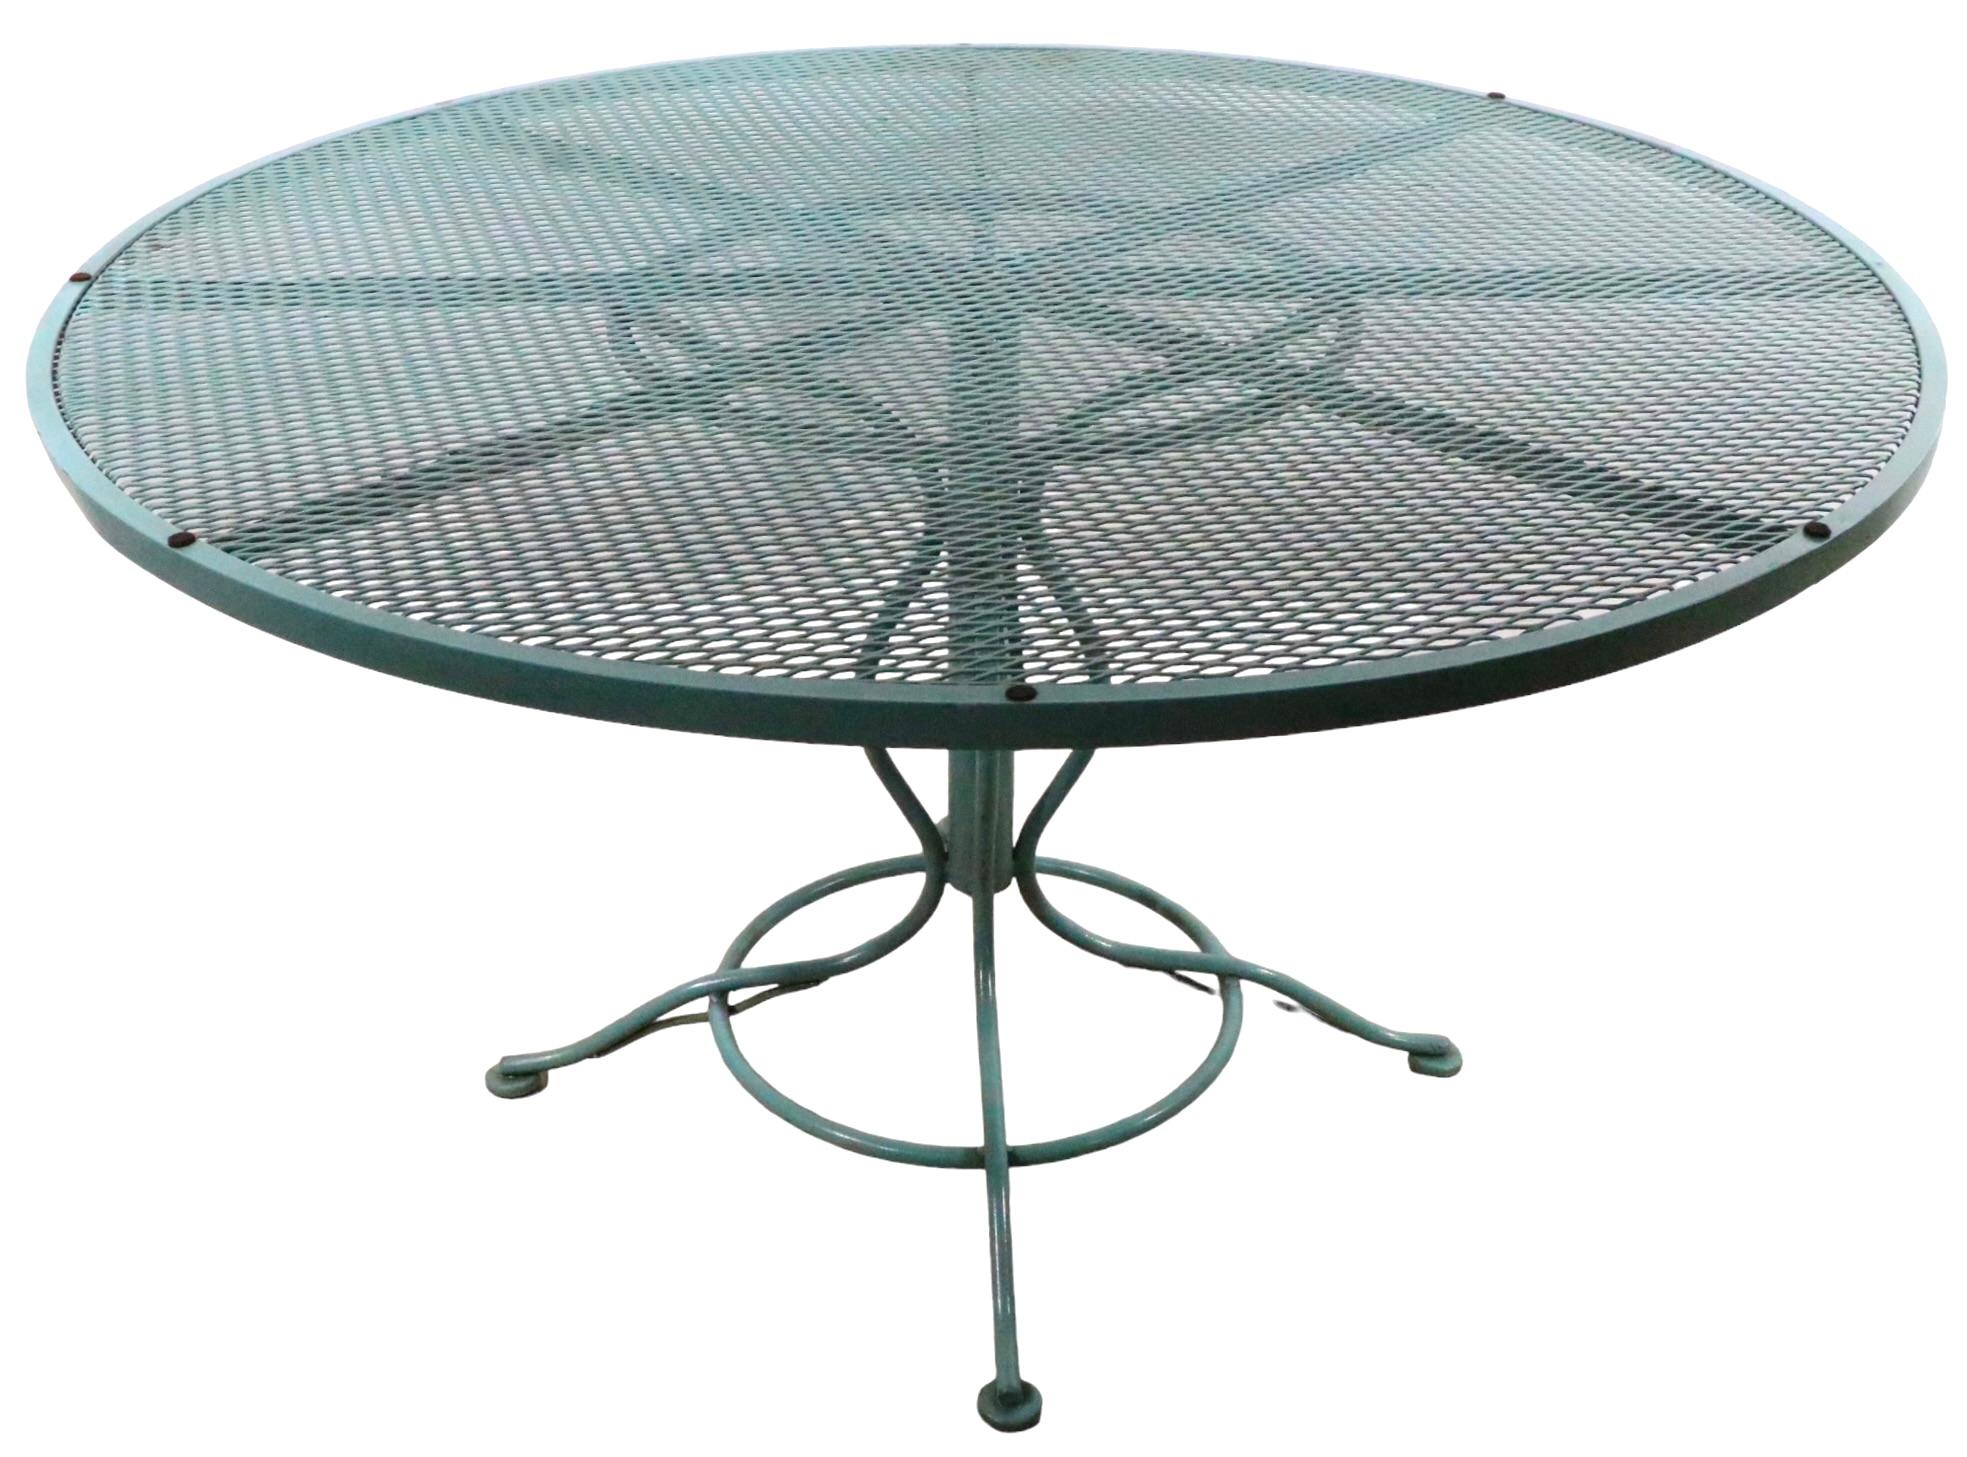 Wrought Iron and Metal Mesh Garden Patio Sculptura Dining Table by Woodard  For Sale 1